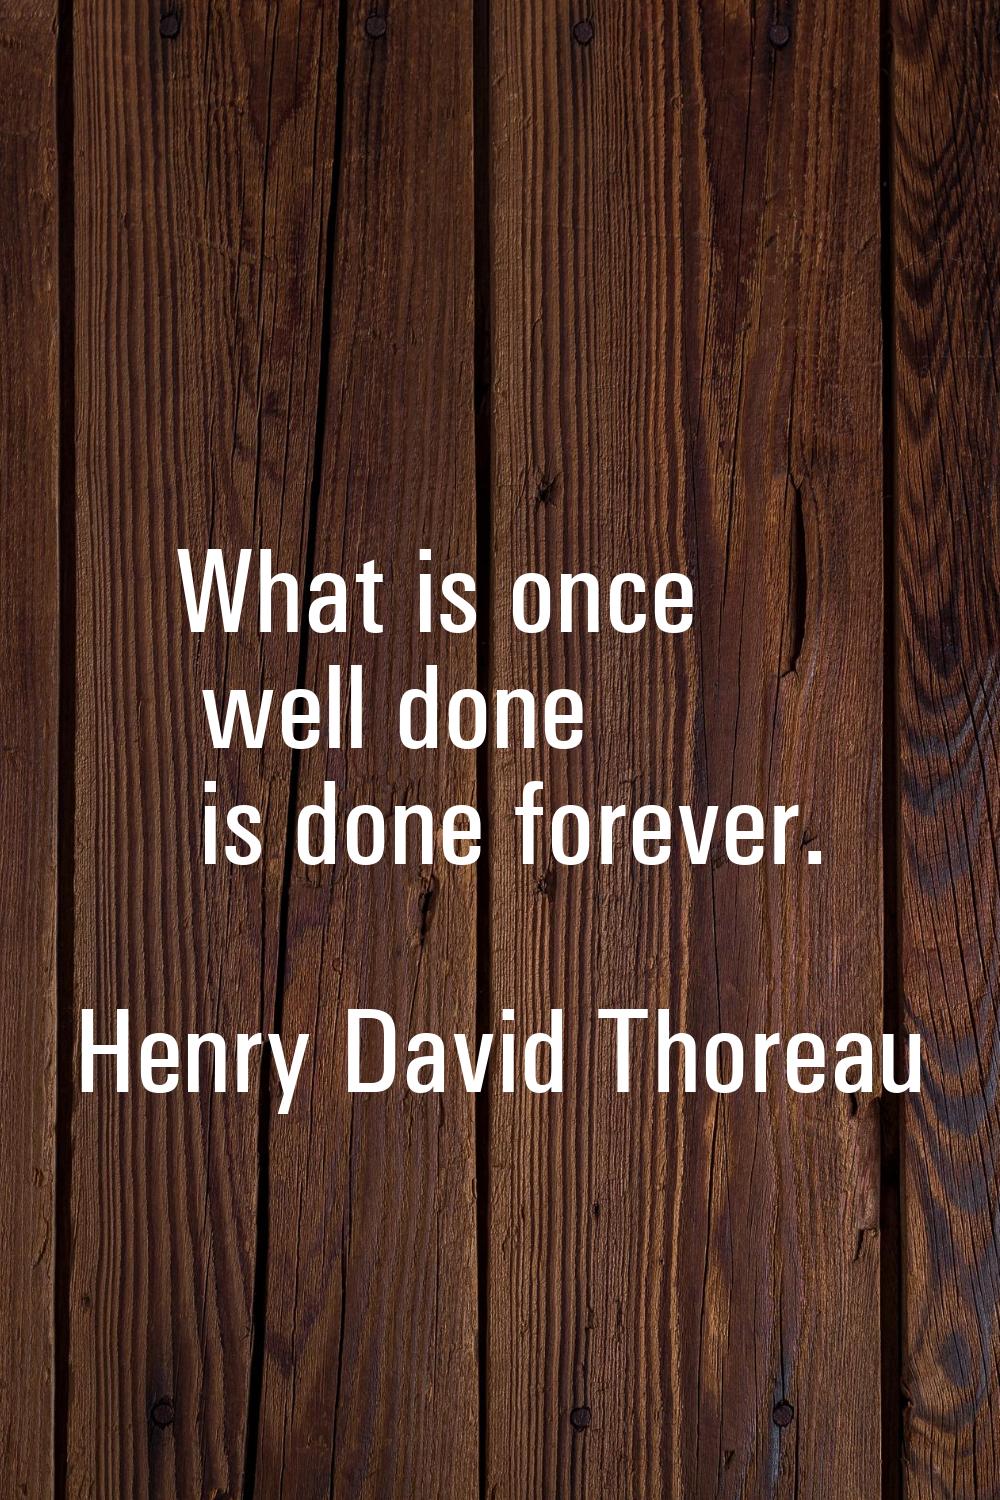 What is once well done is done forever.